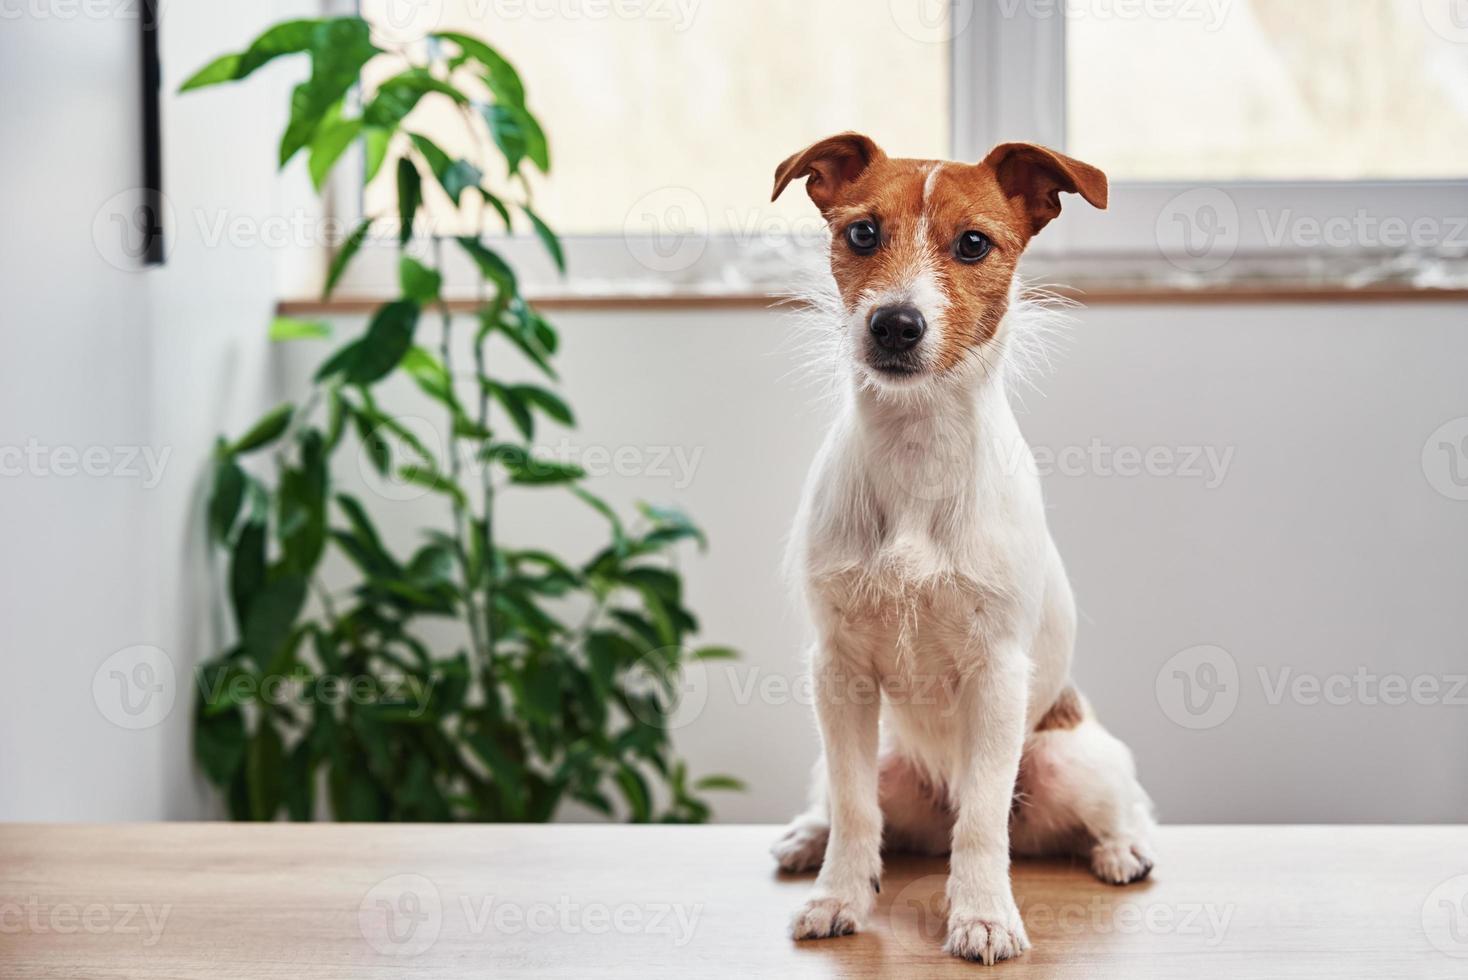 Dog portrait at home. Jack Russell terrier looking at camera photo